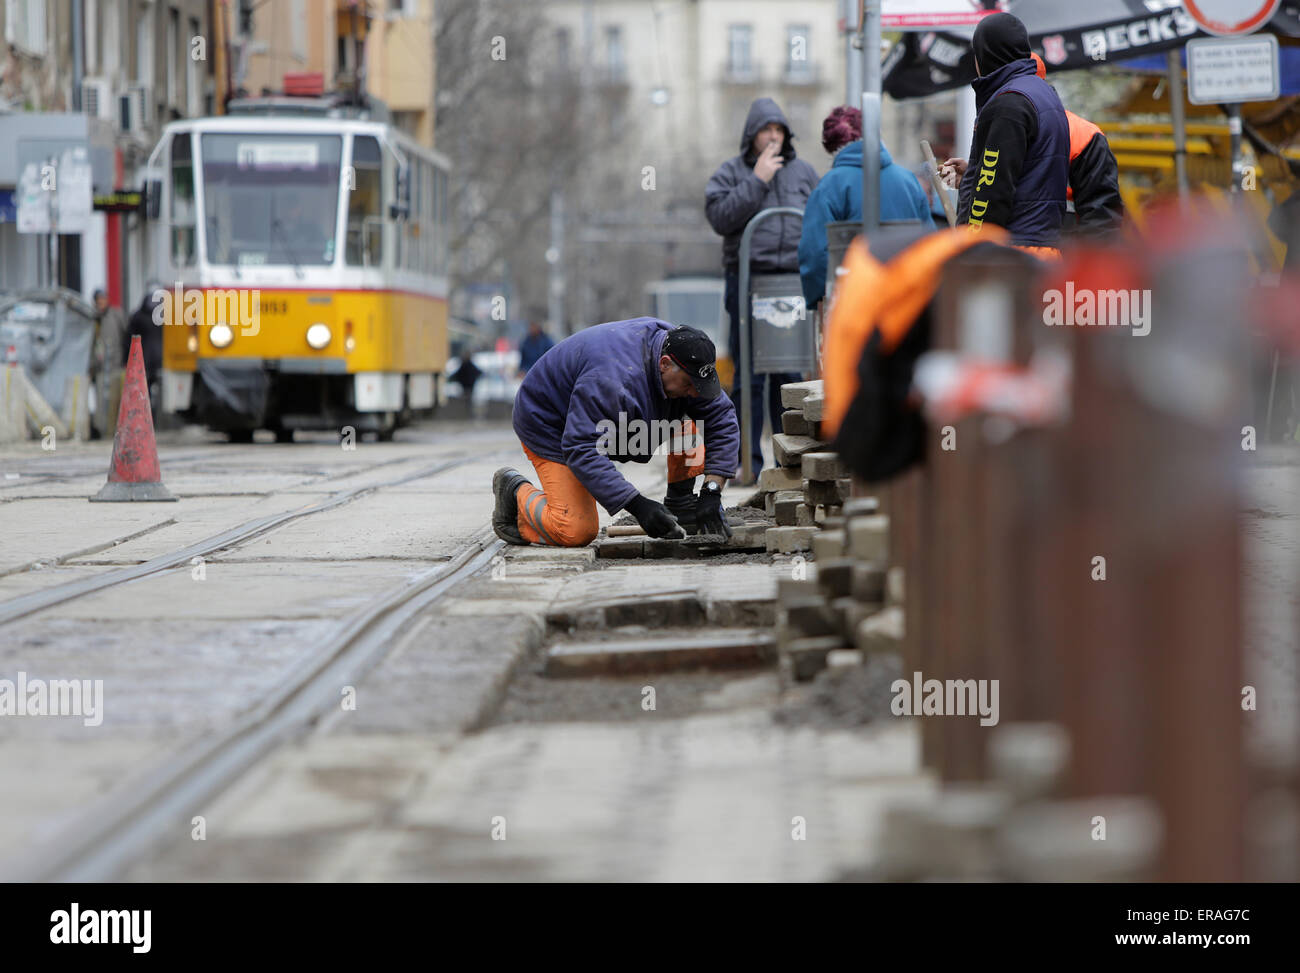 Sofia, Bulgaria - April 7, 2015: Tram road workers are repairing the tram tracks on the tram road. Stock Photo